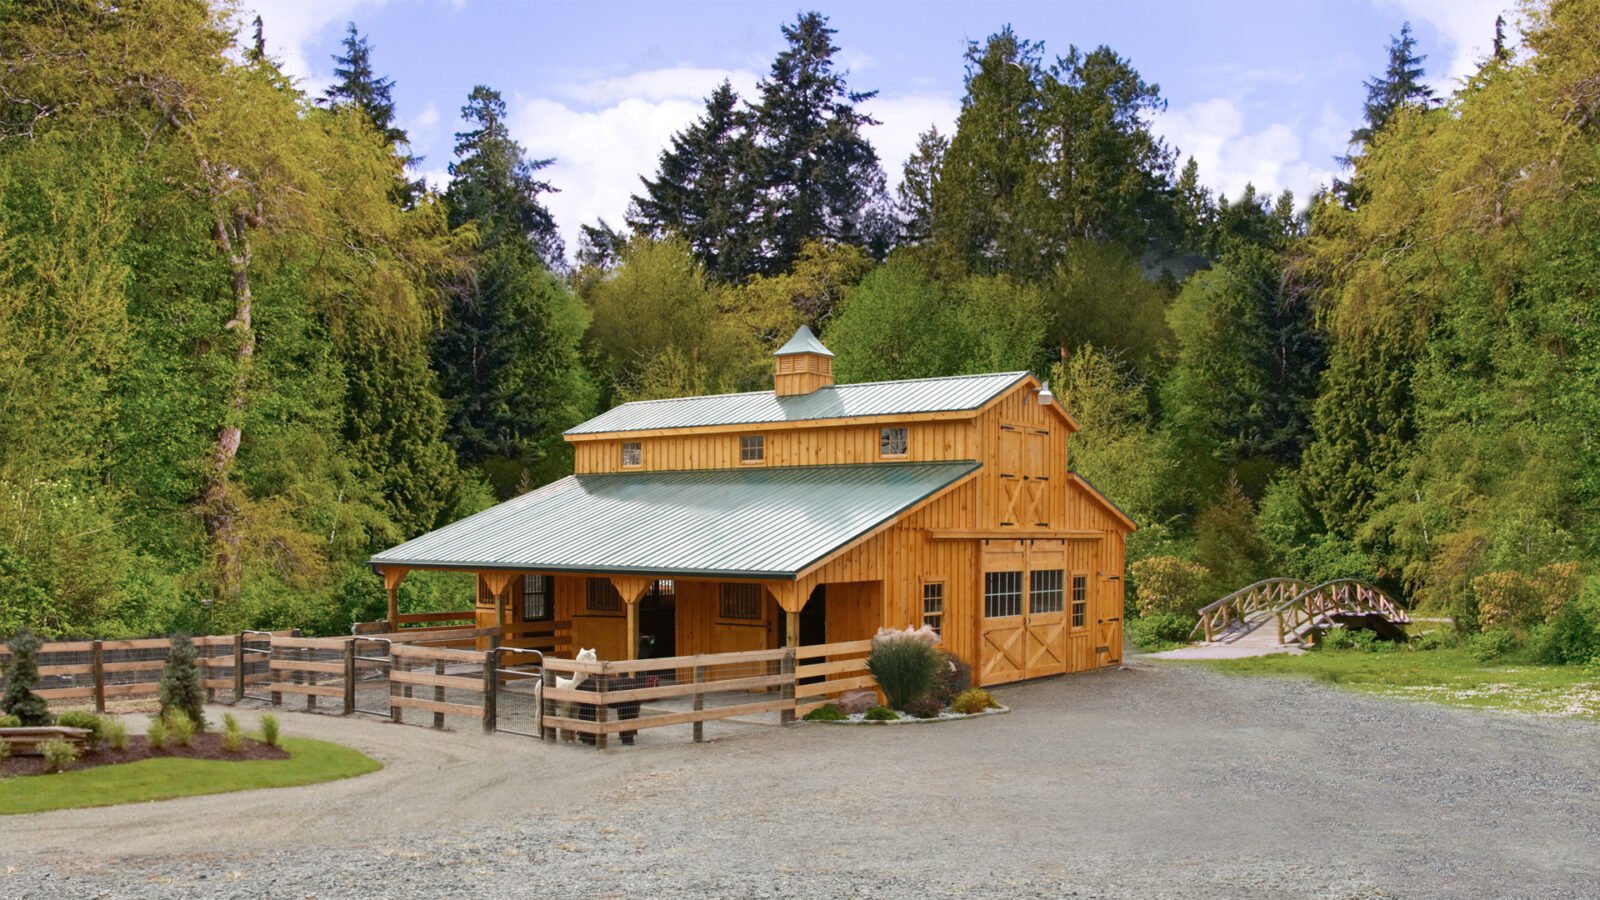 A High-Country horse barn style in the mountains.